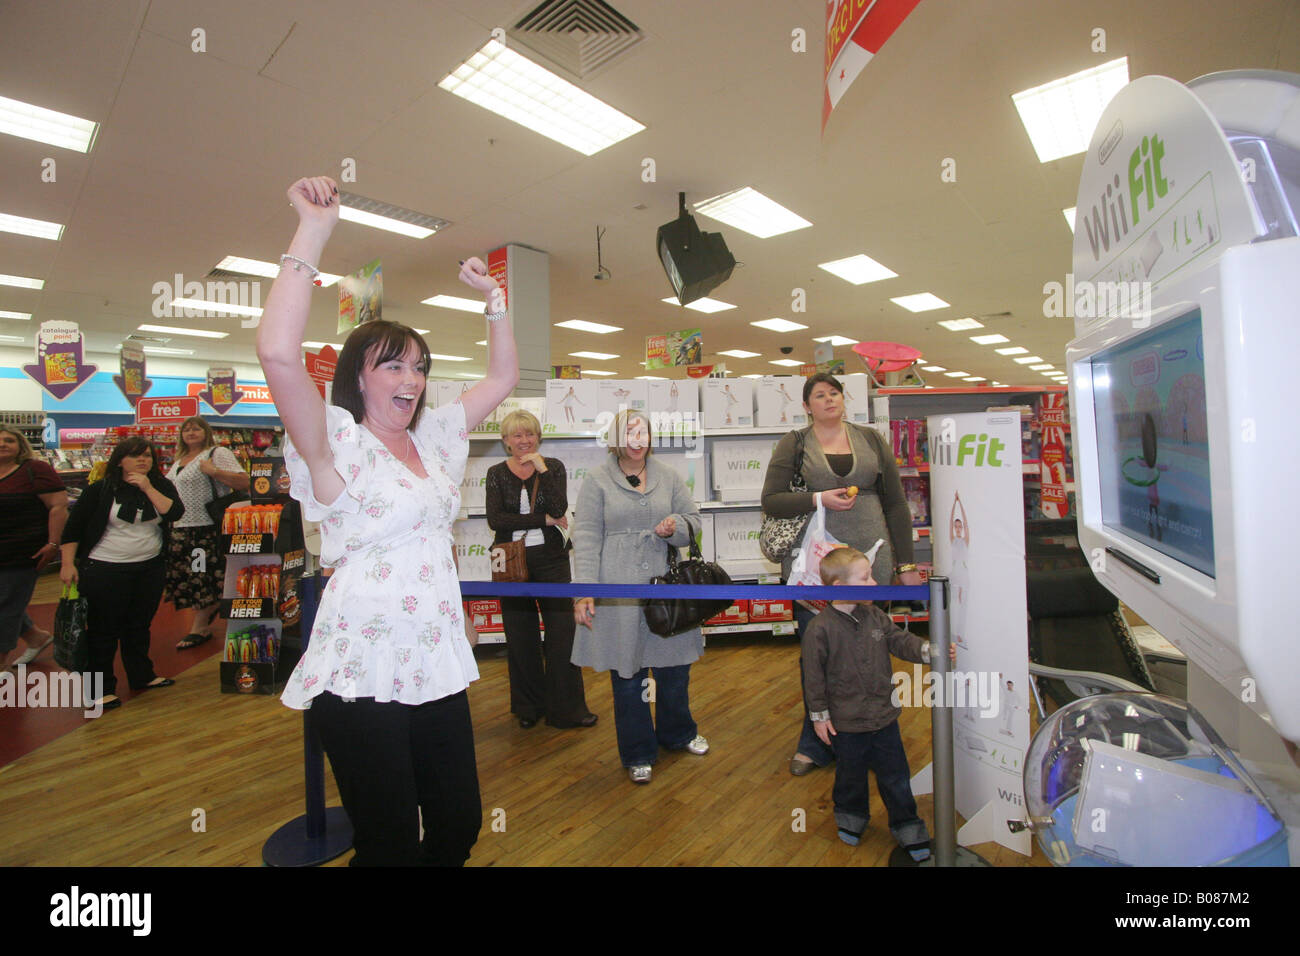 Customers try out the Nintendo WiiFit at Woolworths, Lakeside shopping centre, Essex. Stock Photo